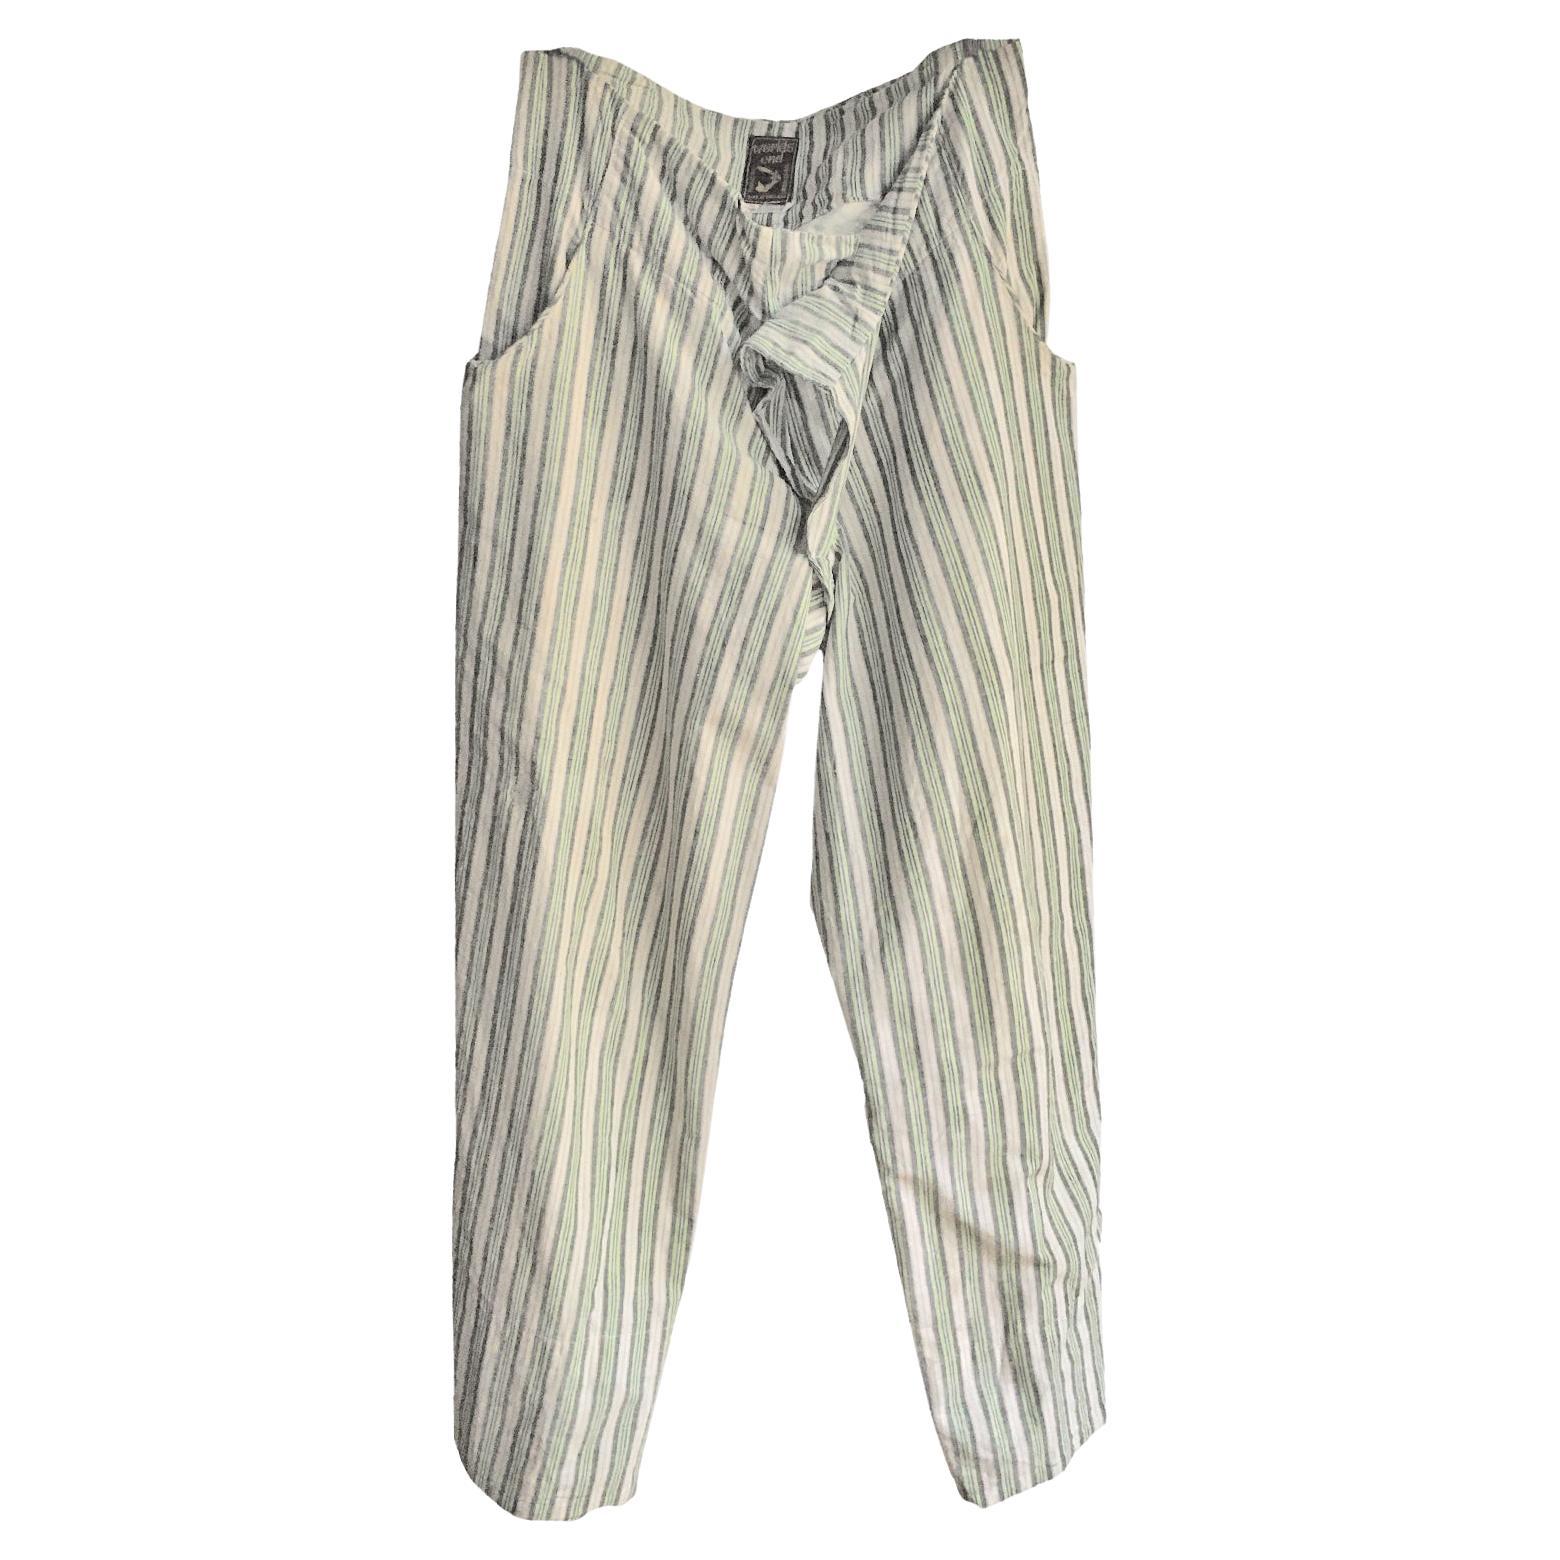 WORLDS END Vivienne Westwood And Malcom Mclaren Pirate Pants Trouser For Sale 2